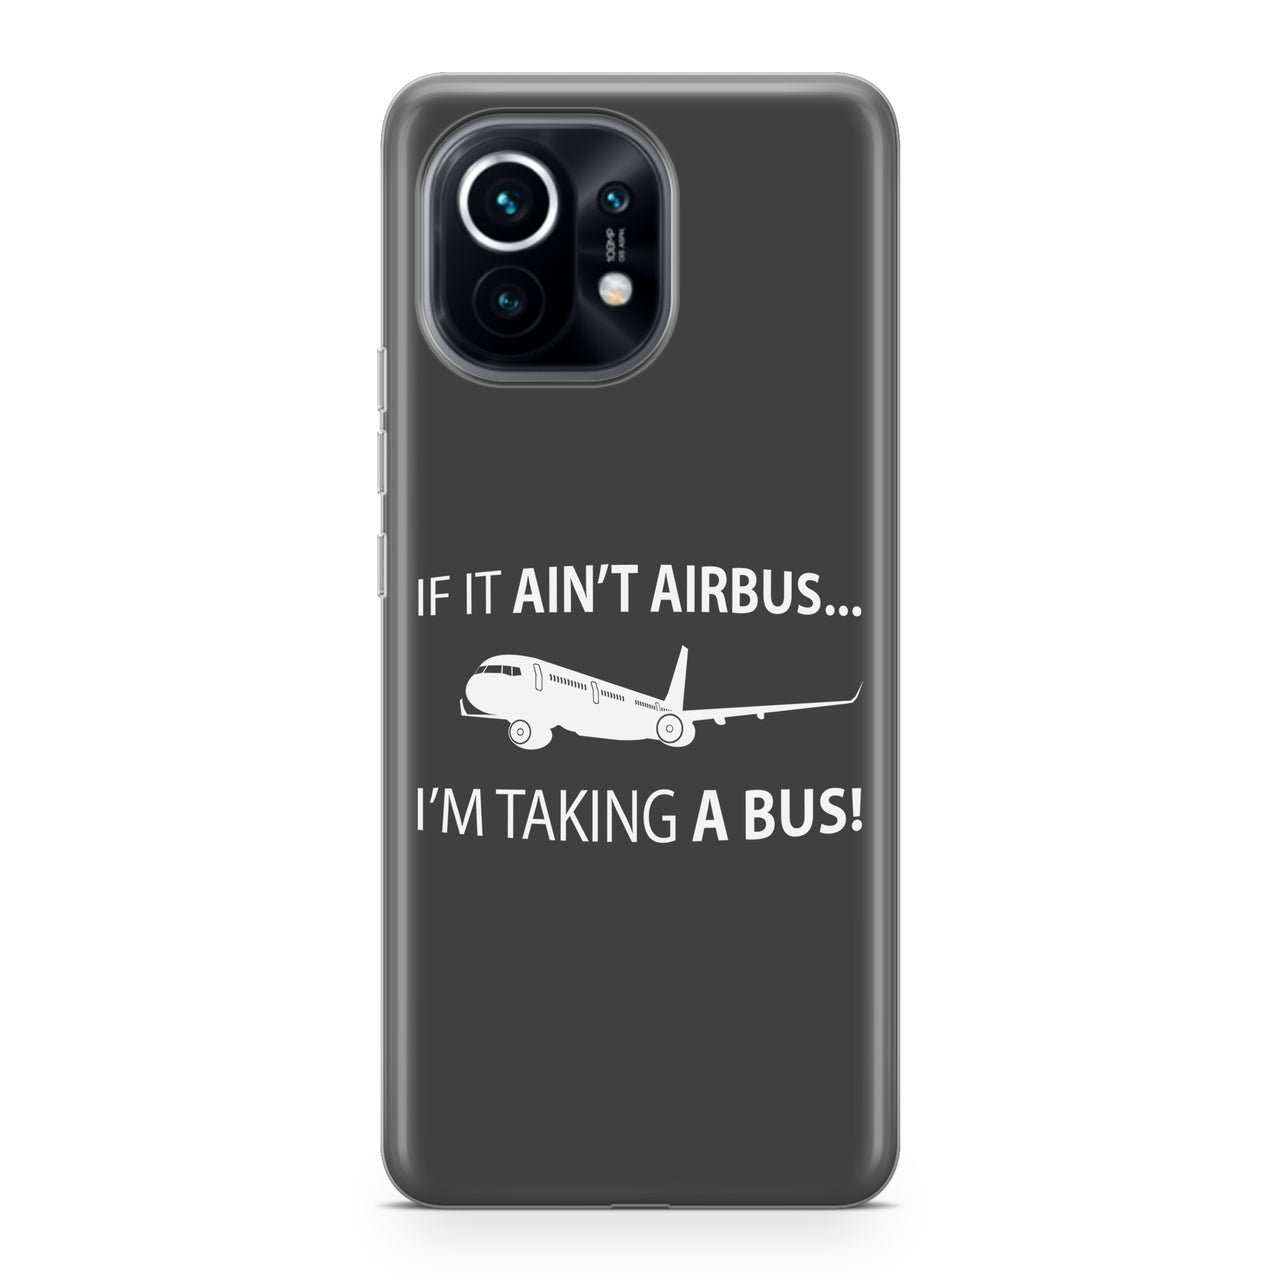 If It Ain't Airbus I'm Taking A Bus Designed Xiaomi Cases